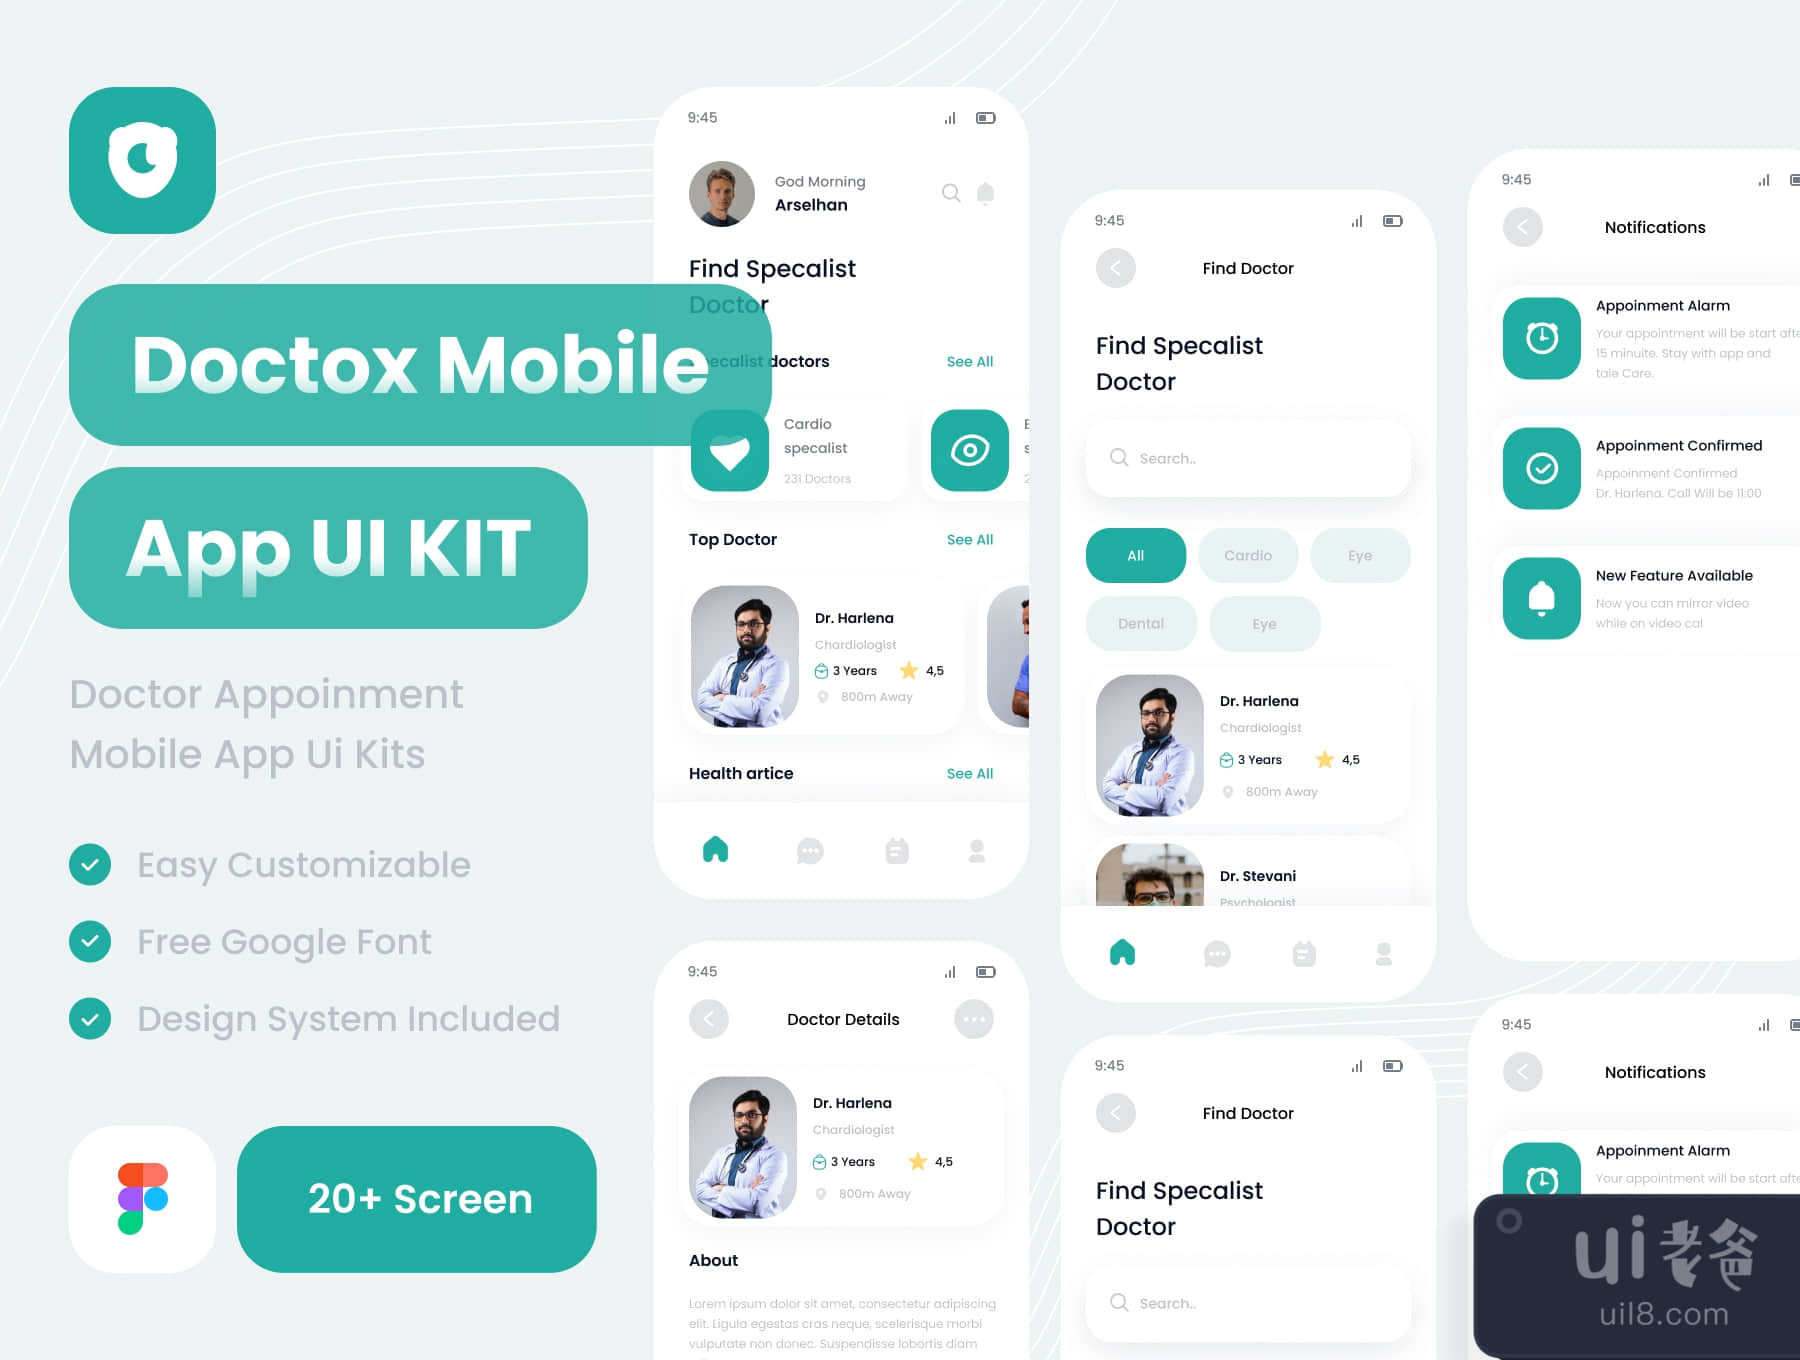 Doctox医生预约移动应用的ui工具包模板 (Doctox doctor appoinment mobile app ui kits template)插图2